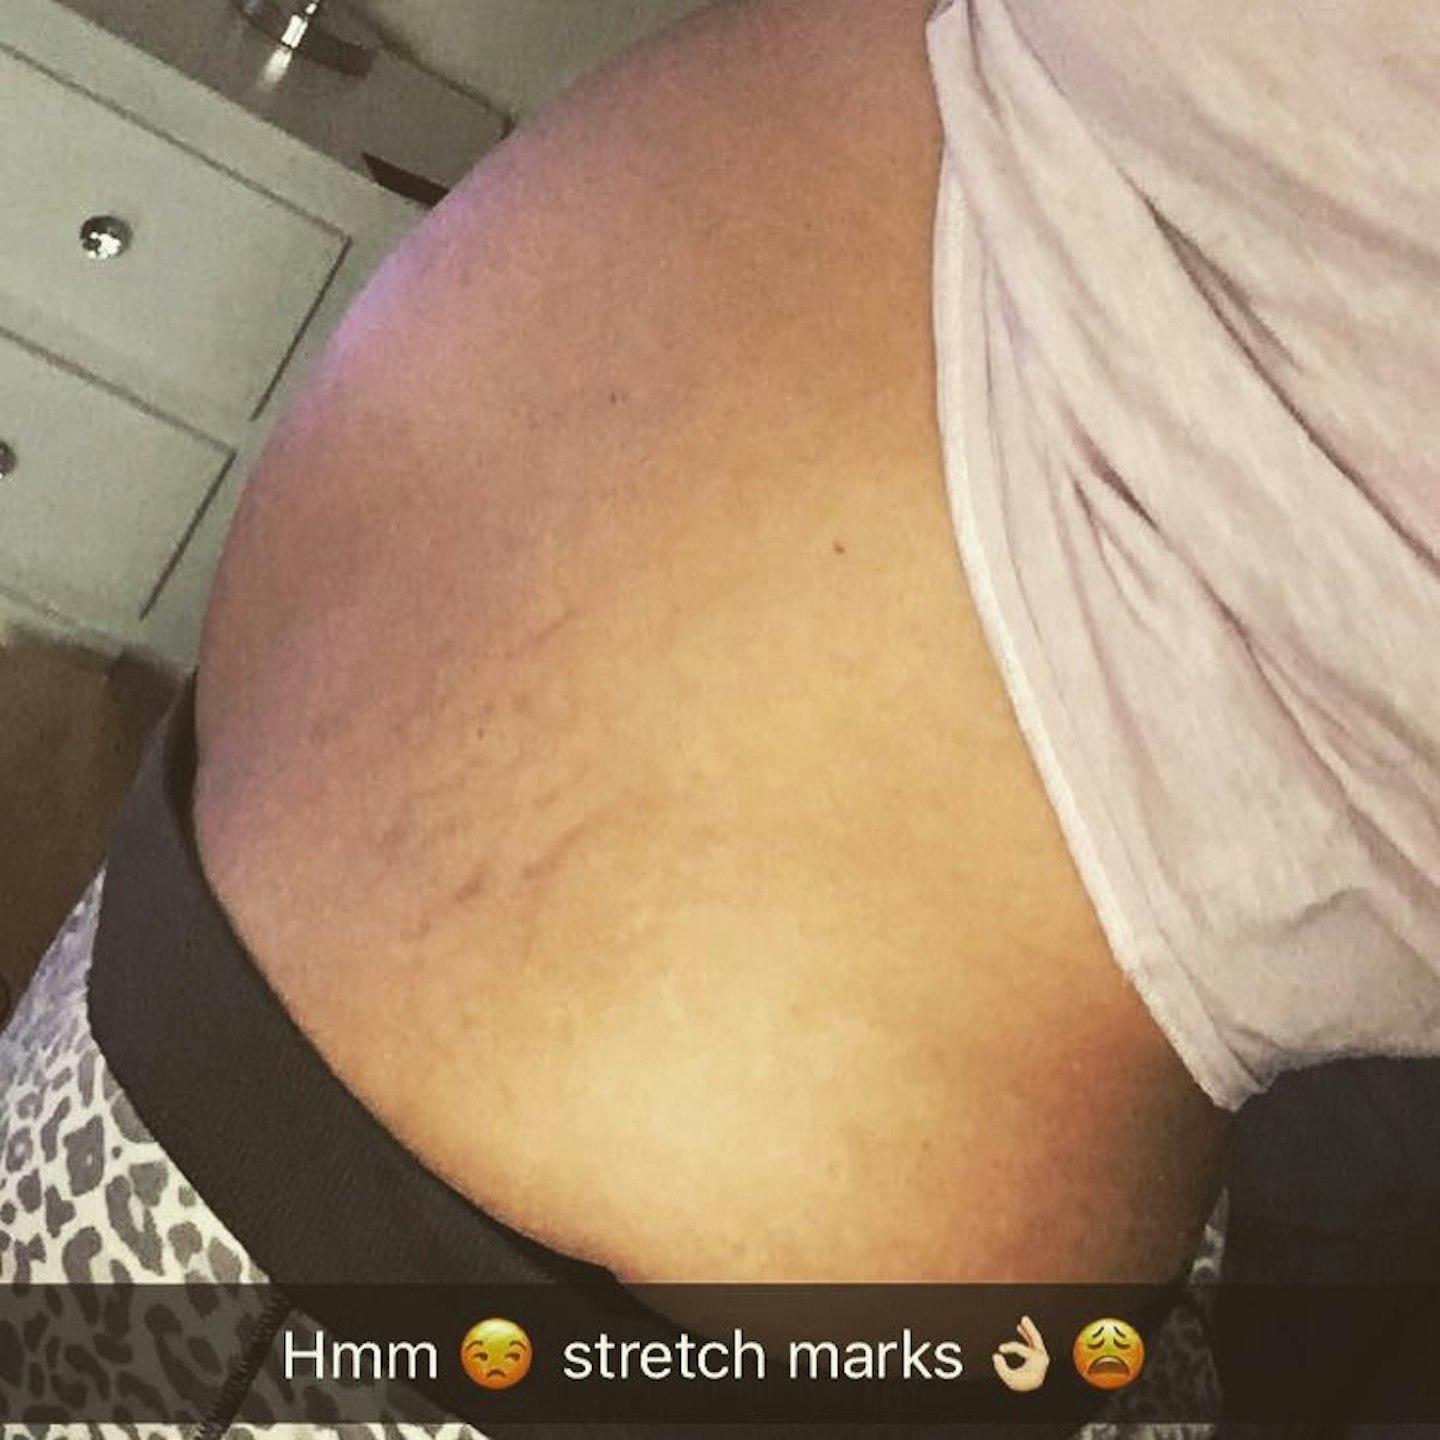 chanelle-hayes-hating-pregnancy-hyperemesis